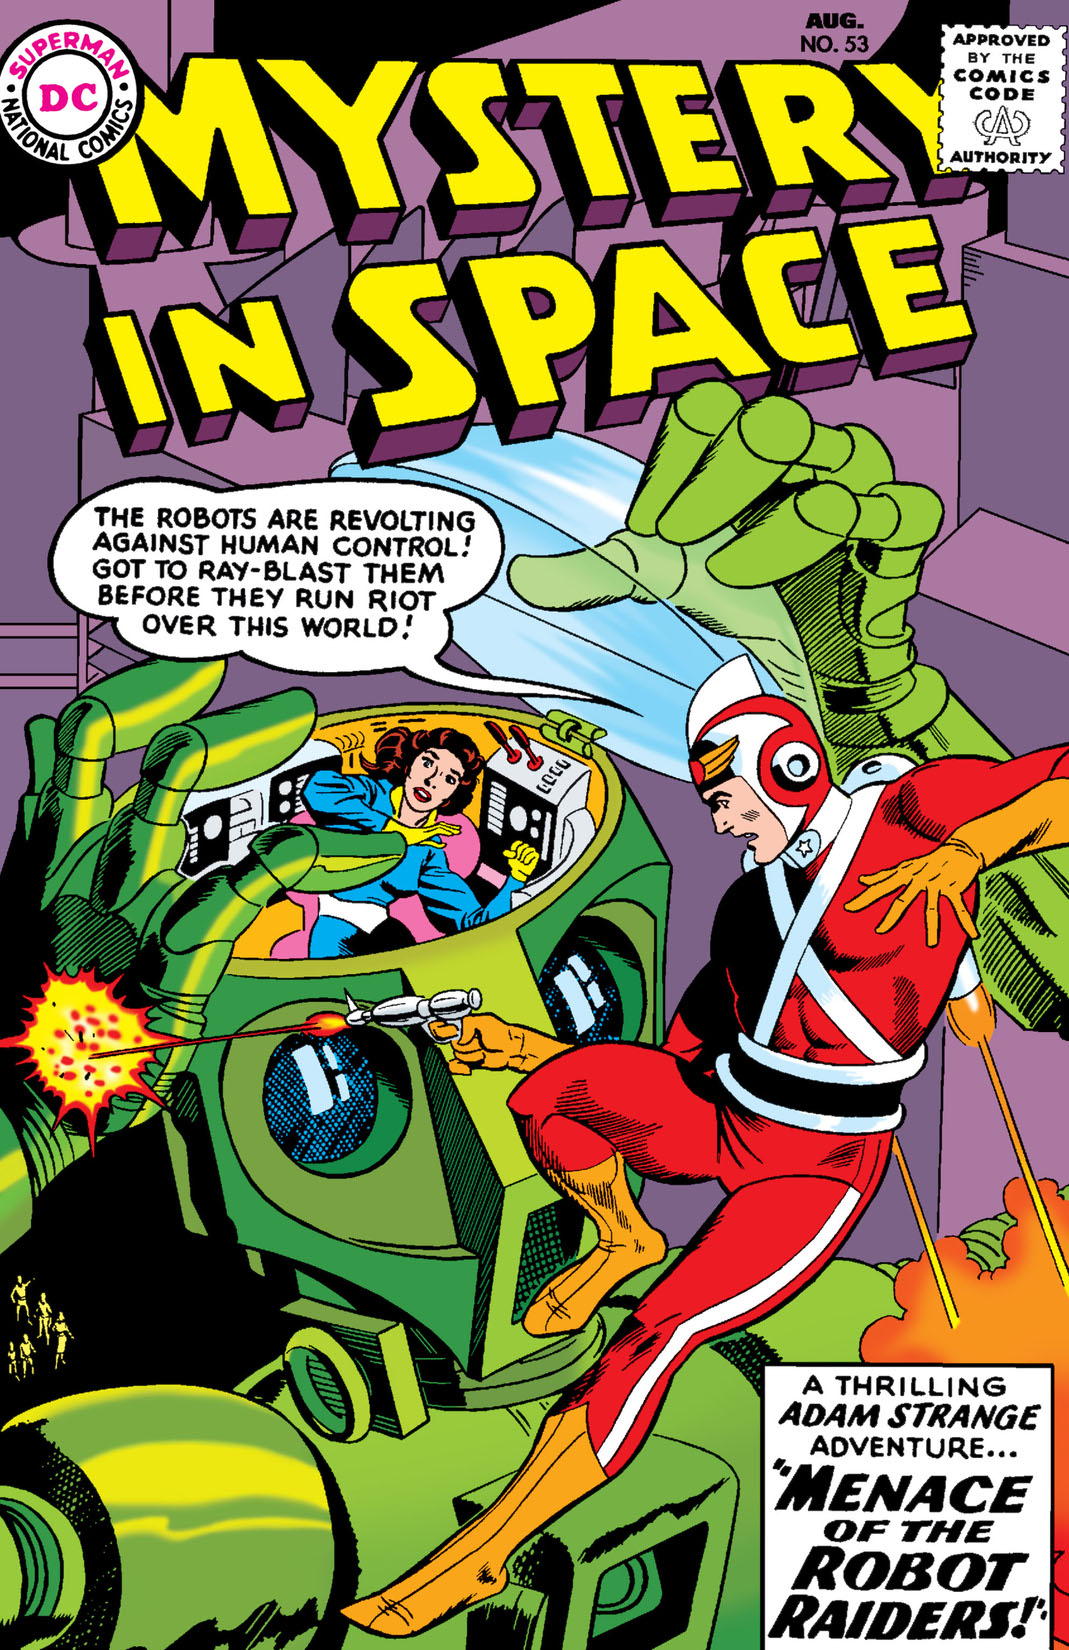 Mystery in Space (1951-1981) #53 preview images